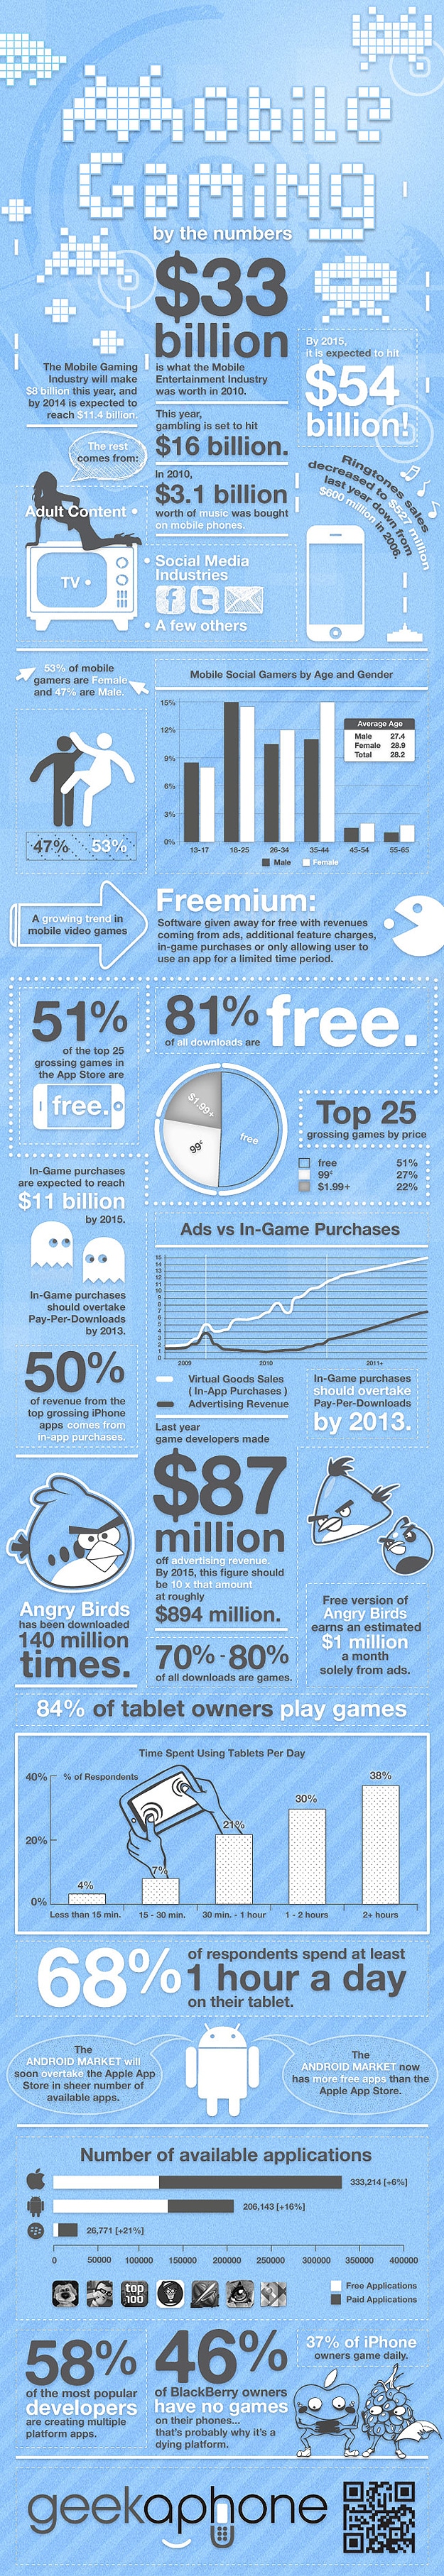 Whoa! Mobile Gaming By The Numbers [Infographic]